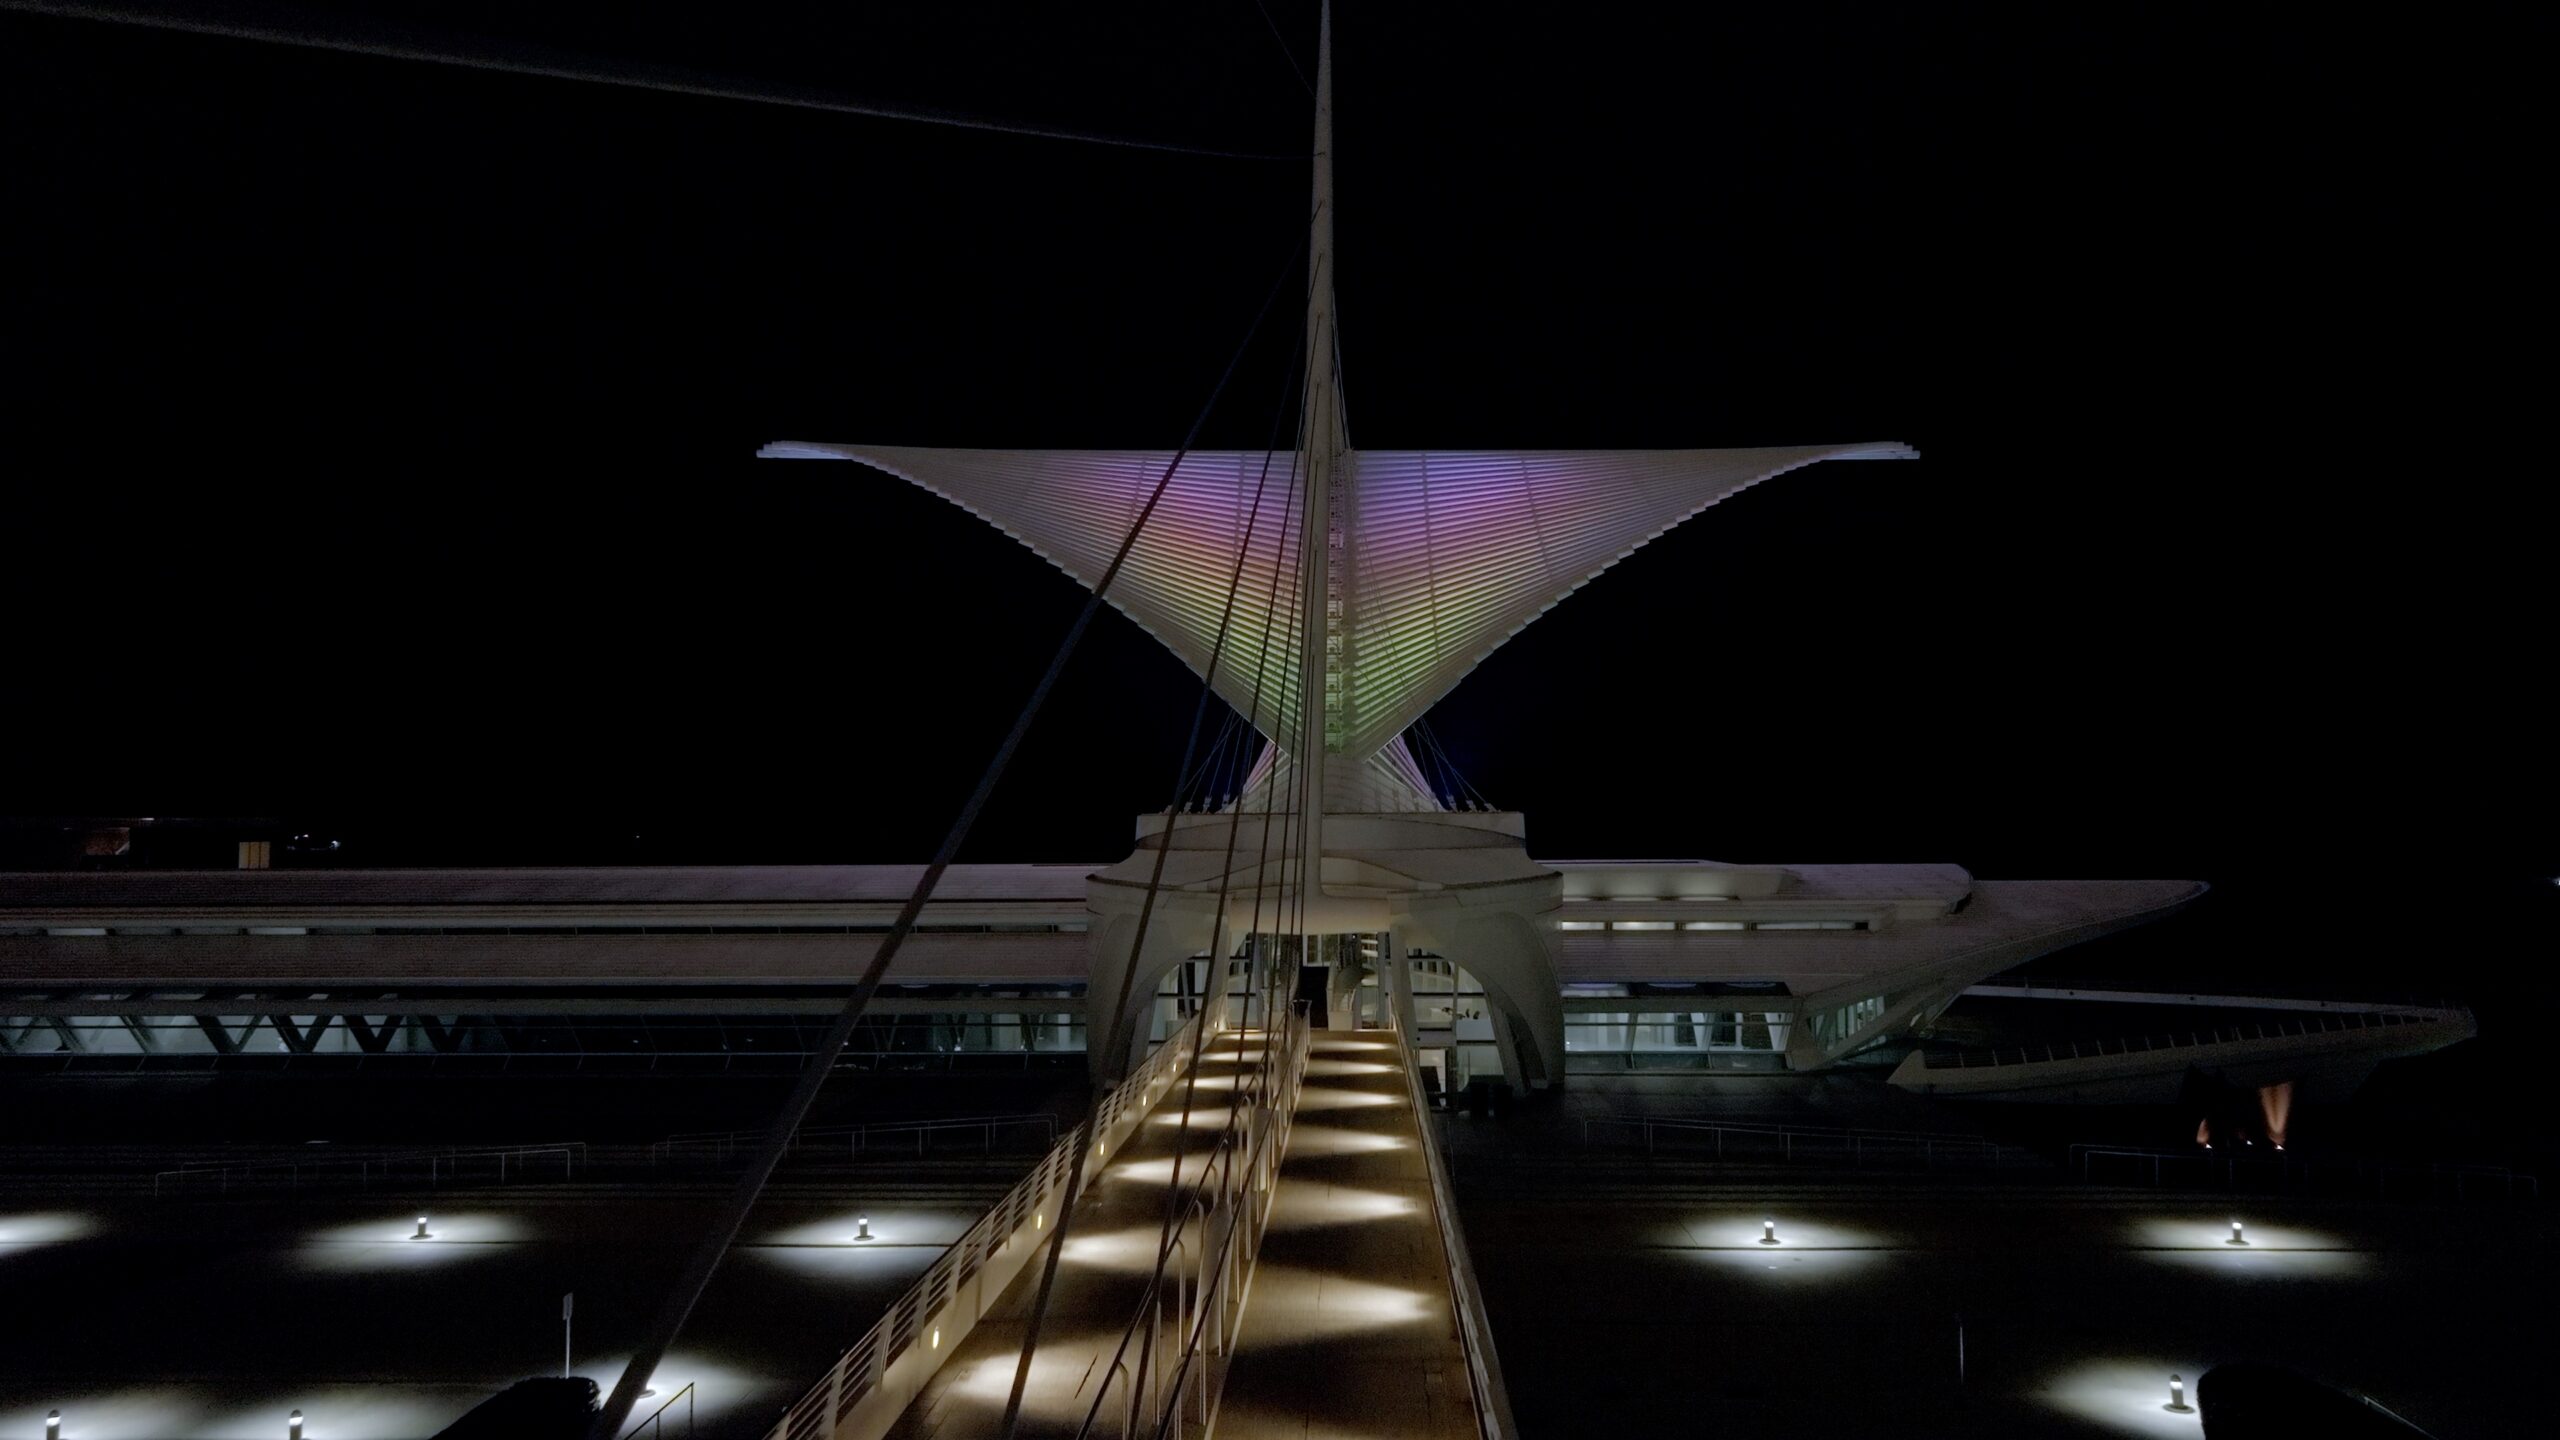 The Milwaukee Art Museum’s signature wings now have a new lighting system